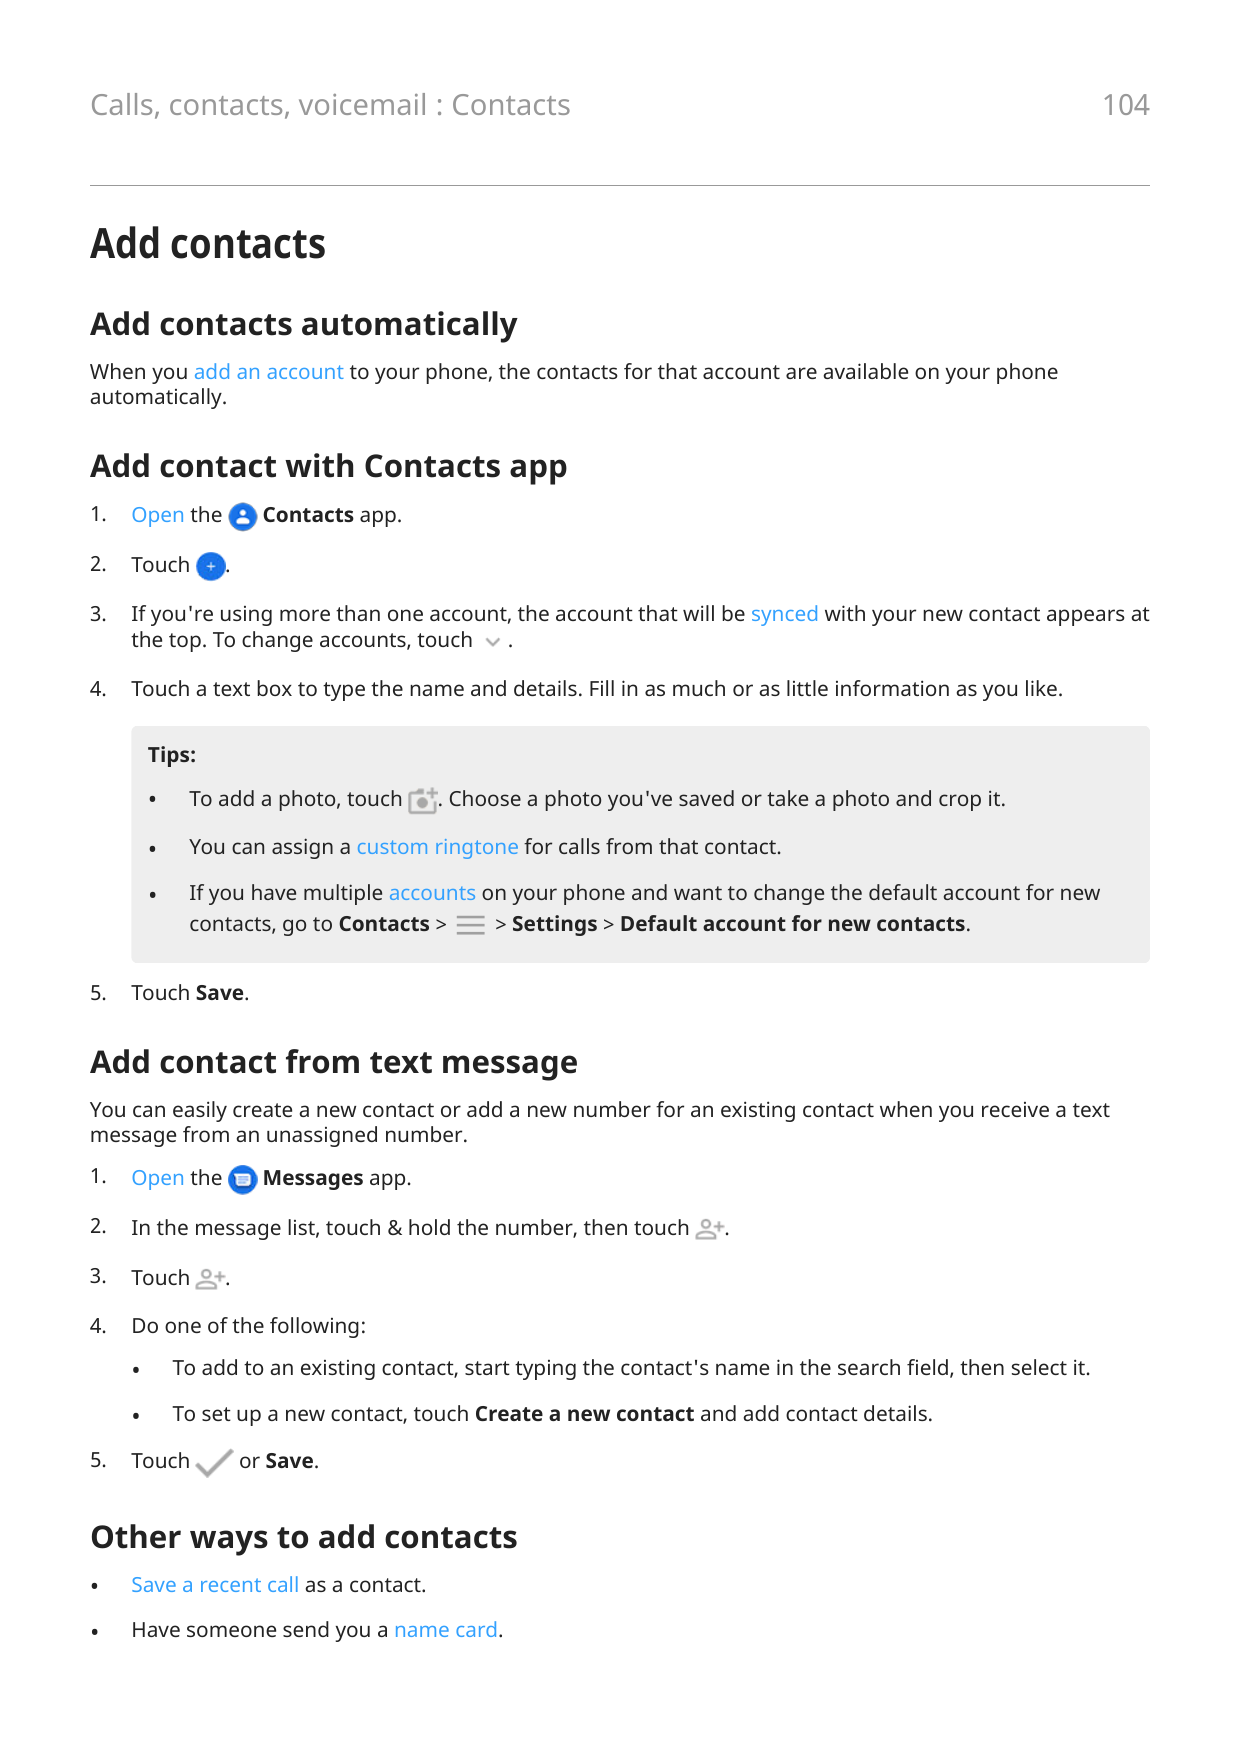 104Calls, contacts, voicemail : ContactsAdd contactsAdd contacts automaticallyWhen you add an account to your phone, the contact